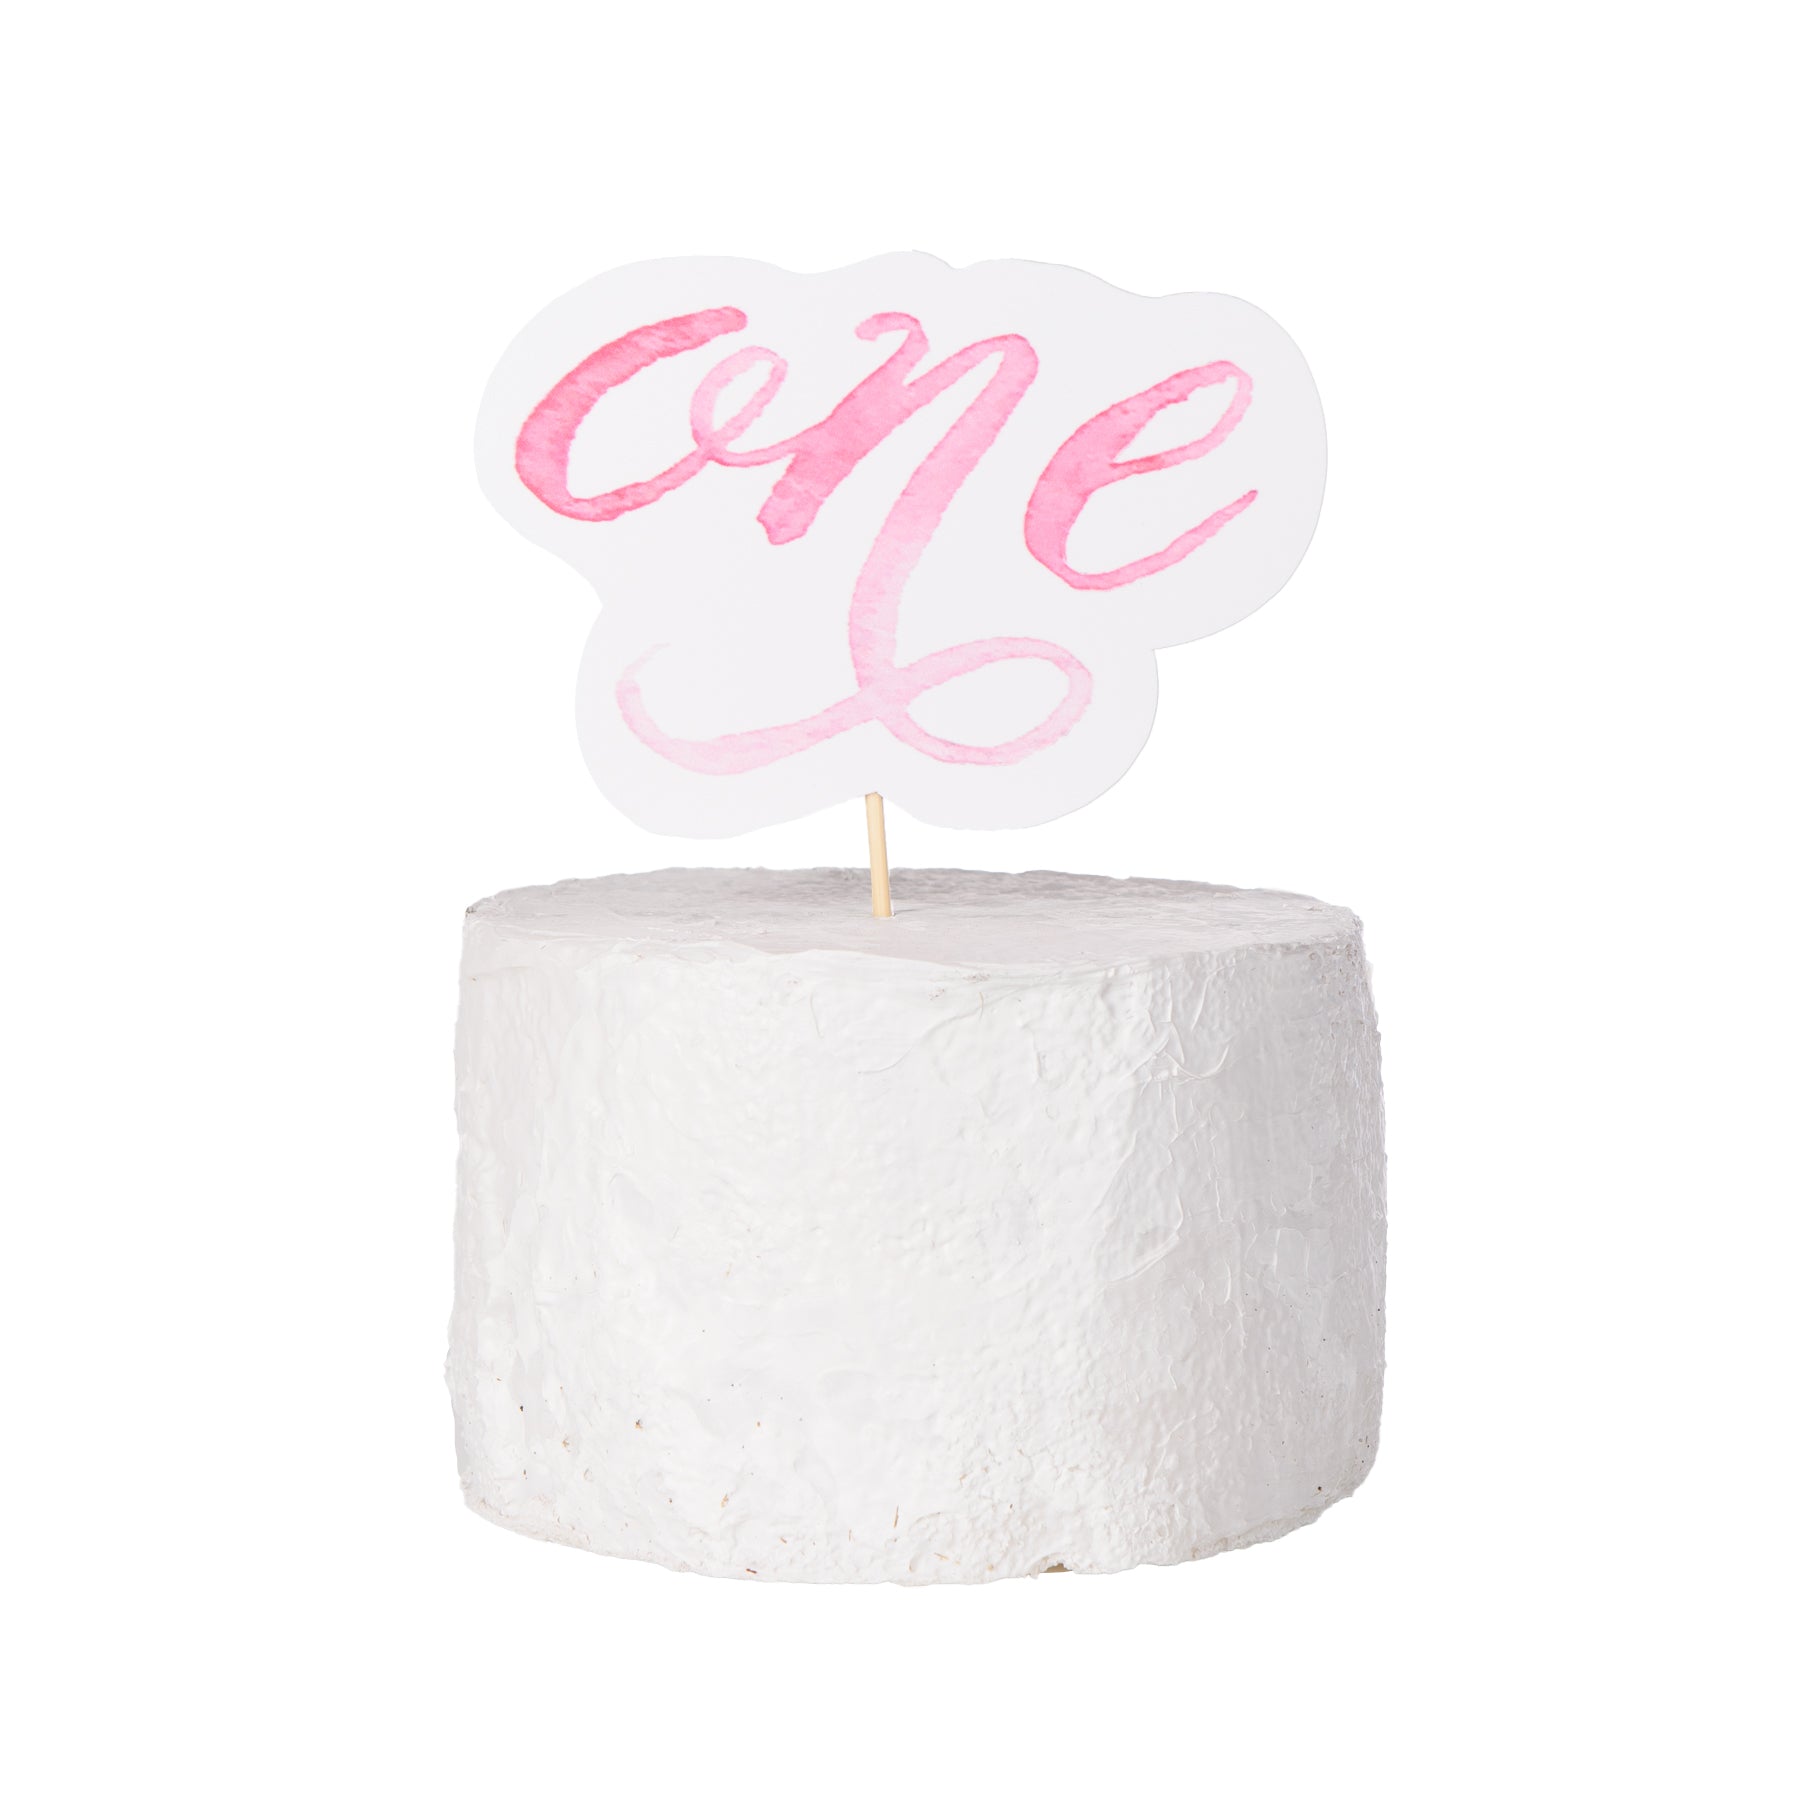 ONE Cake Topper - Pink